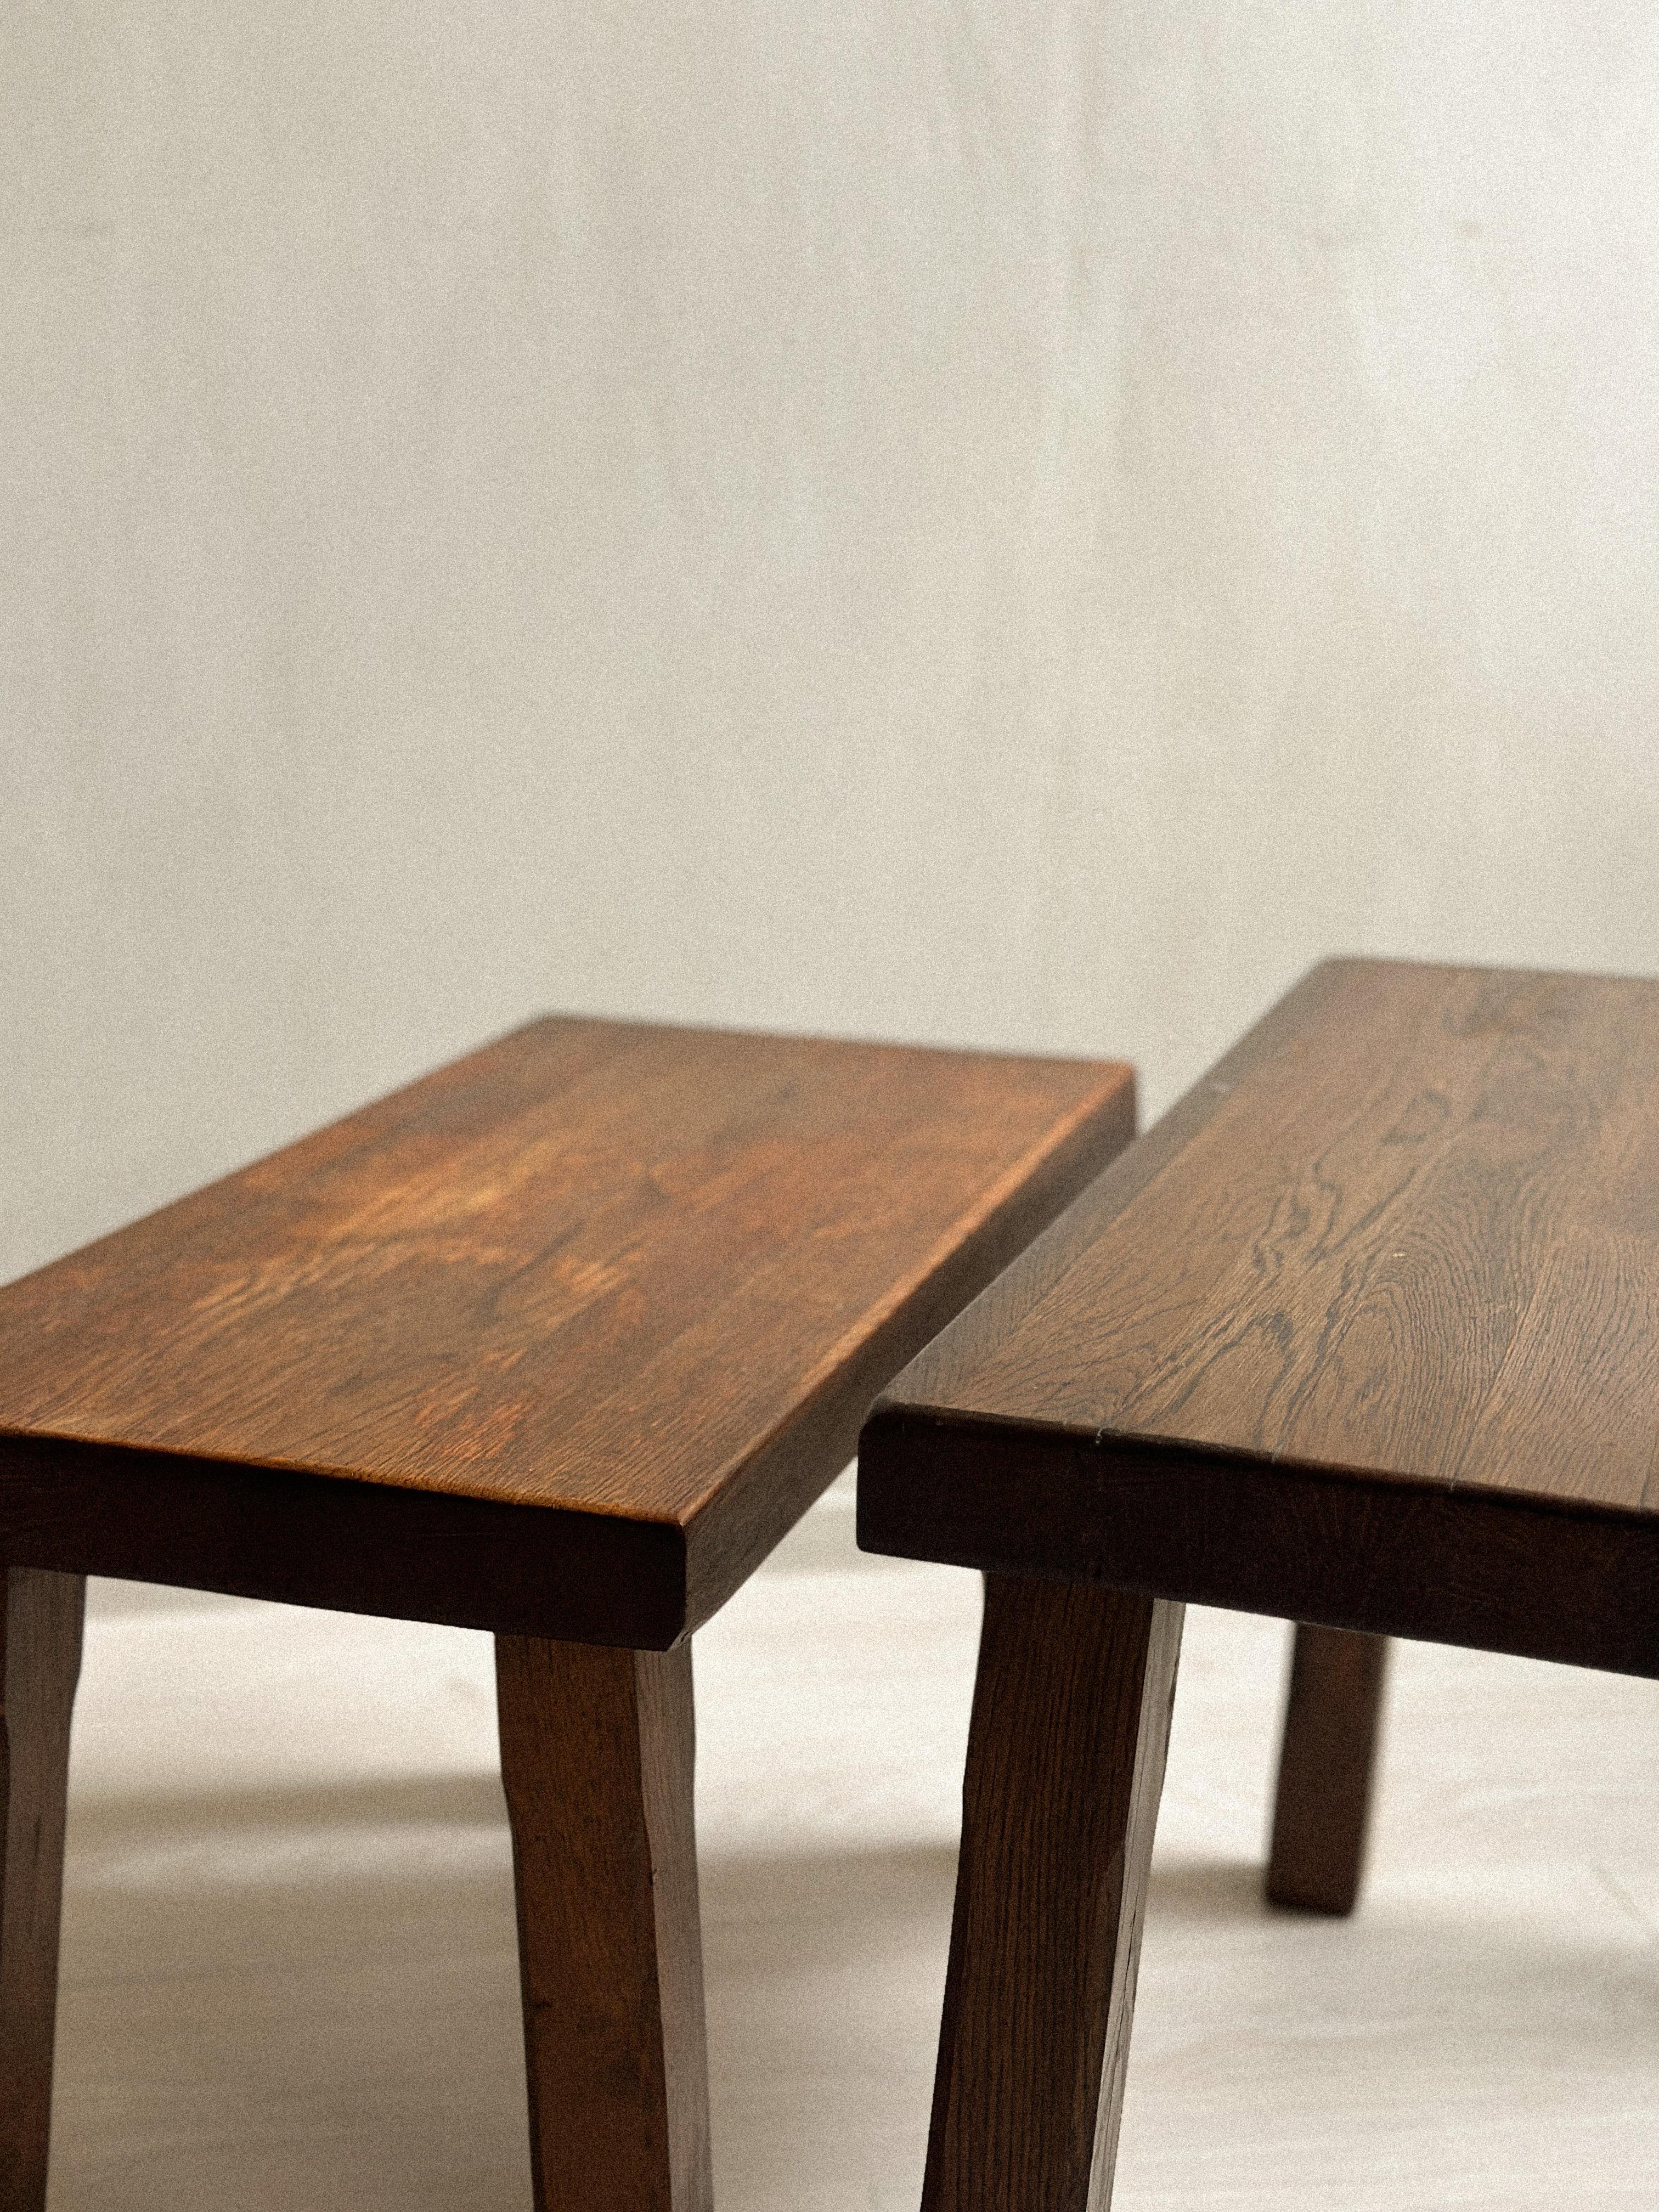 A Set of Midcentury Nesting Tables in Massive Oak, France, c. 1960s  In Good Condition For Sale In Hønefoss, 30